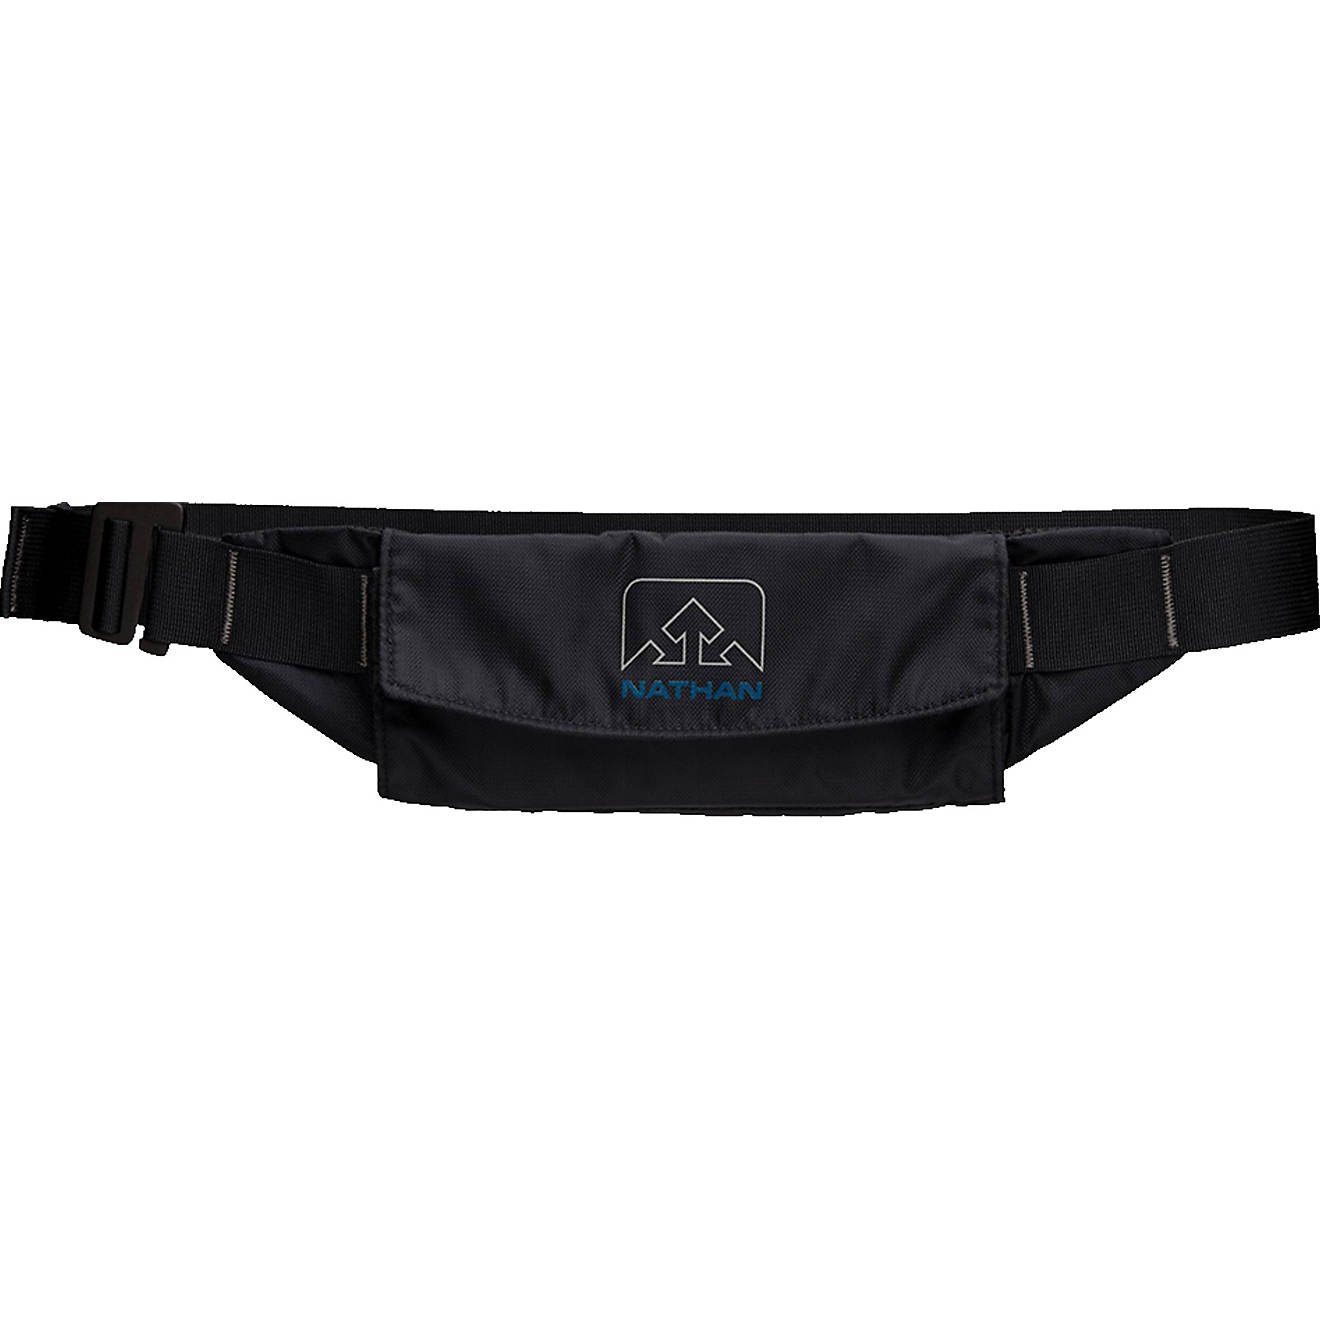 Running Runners Fanny Pack Cr - For Men and Women Bounce Free Pouch Zippers and Adjustable Pouch Strap Hiking Fits all Phones NATHAN Running Belt Waist Pack 5K with Reflective Detail iPhone, Android, Windows Biking Ultra-Lightweight Neoprene 